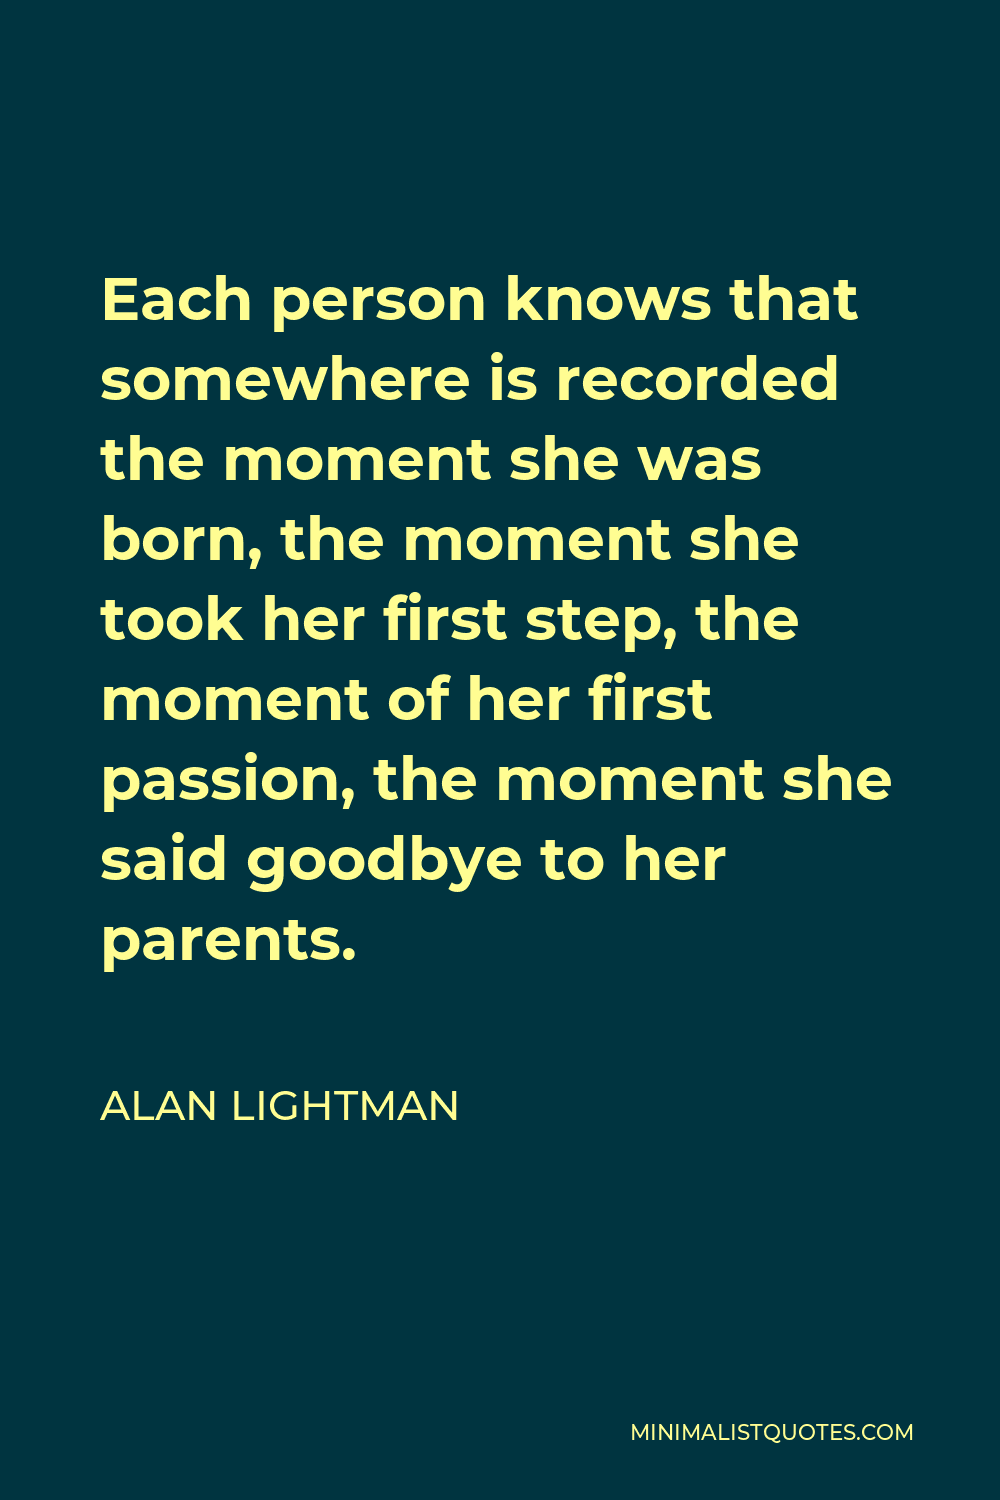 Alan Lightman Quote - Each person knows that somewhere is recorded the moment she was born, the moment she took her first step, the moment of her first passion, the moment she said goodbye to her parents.